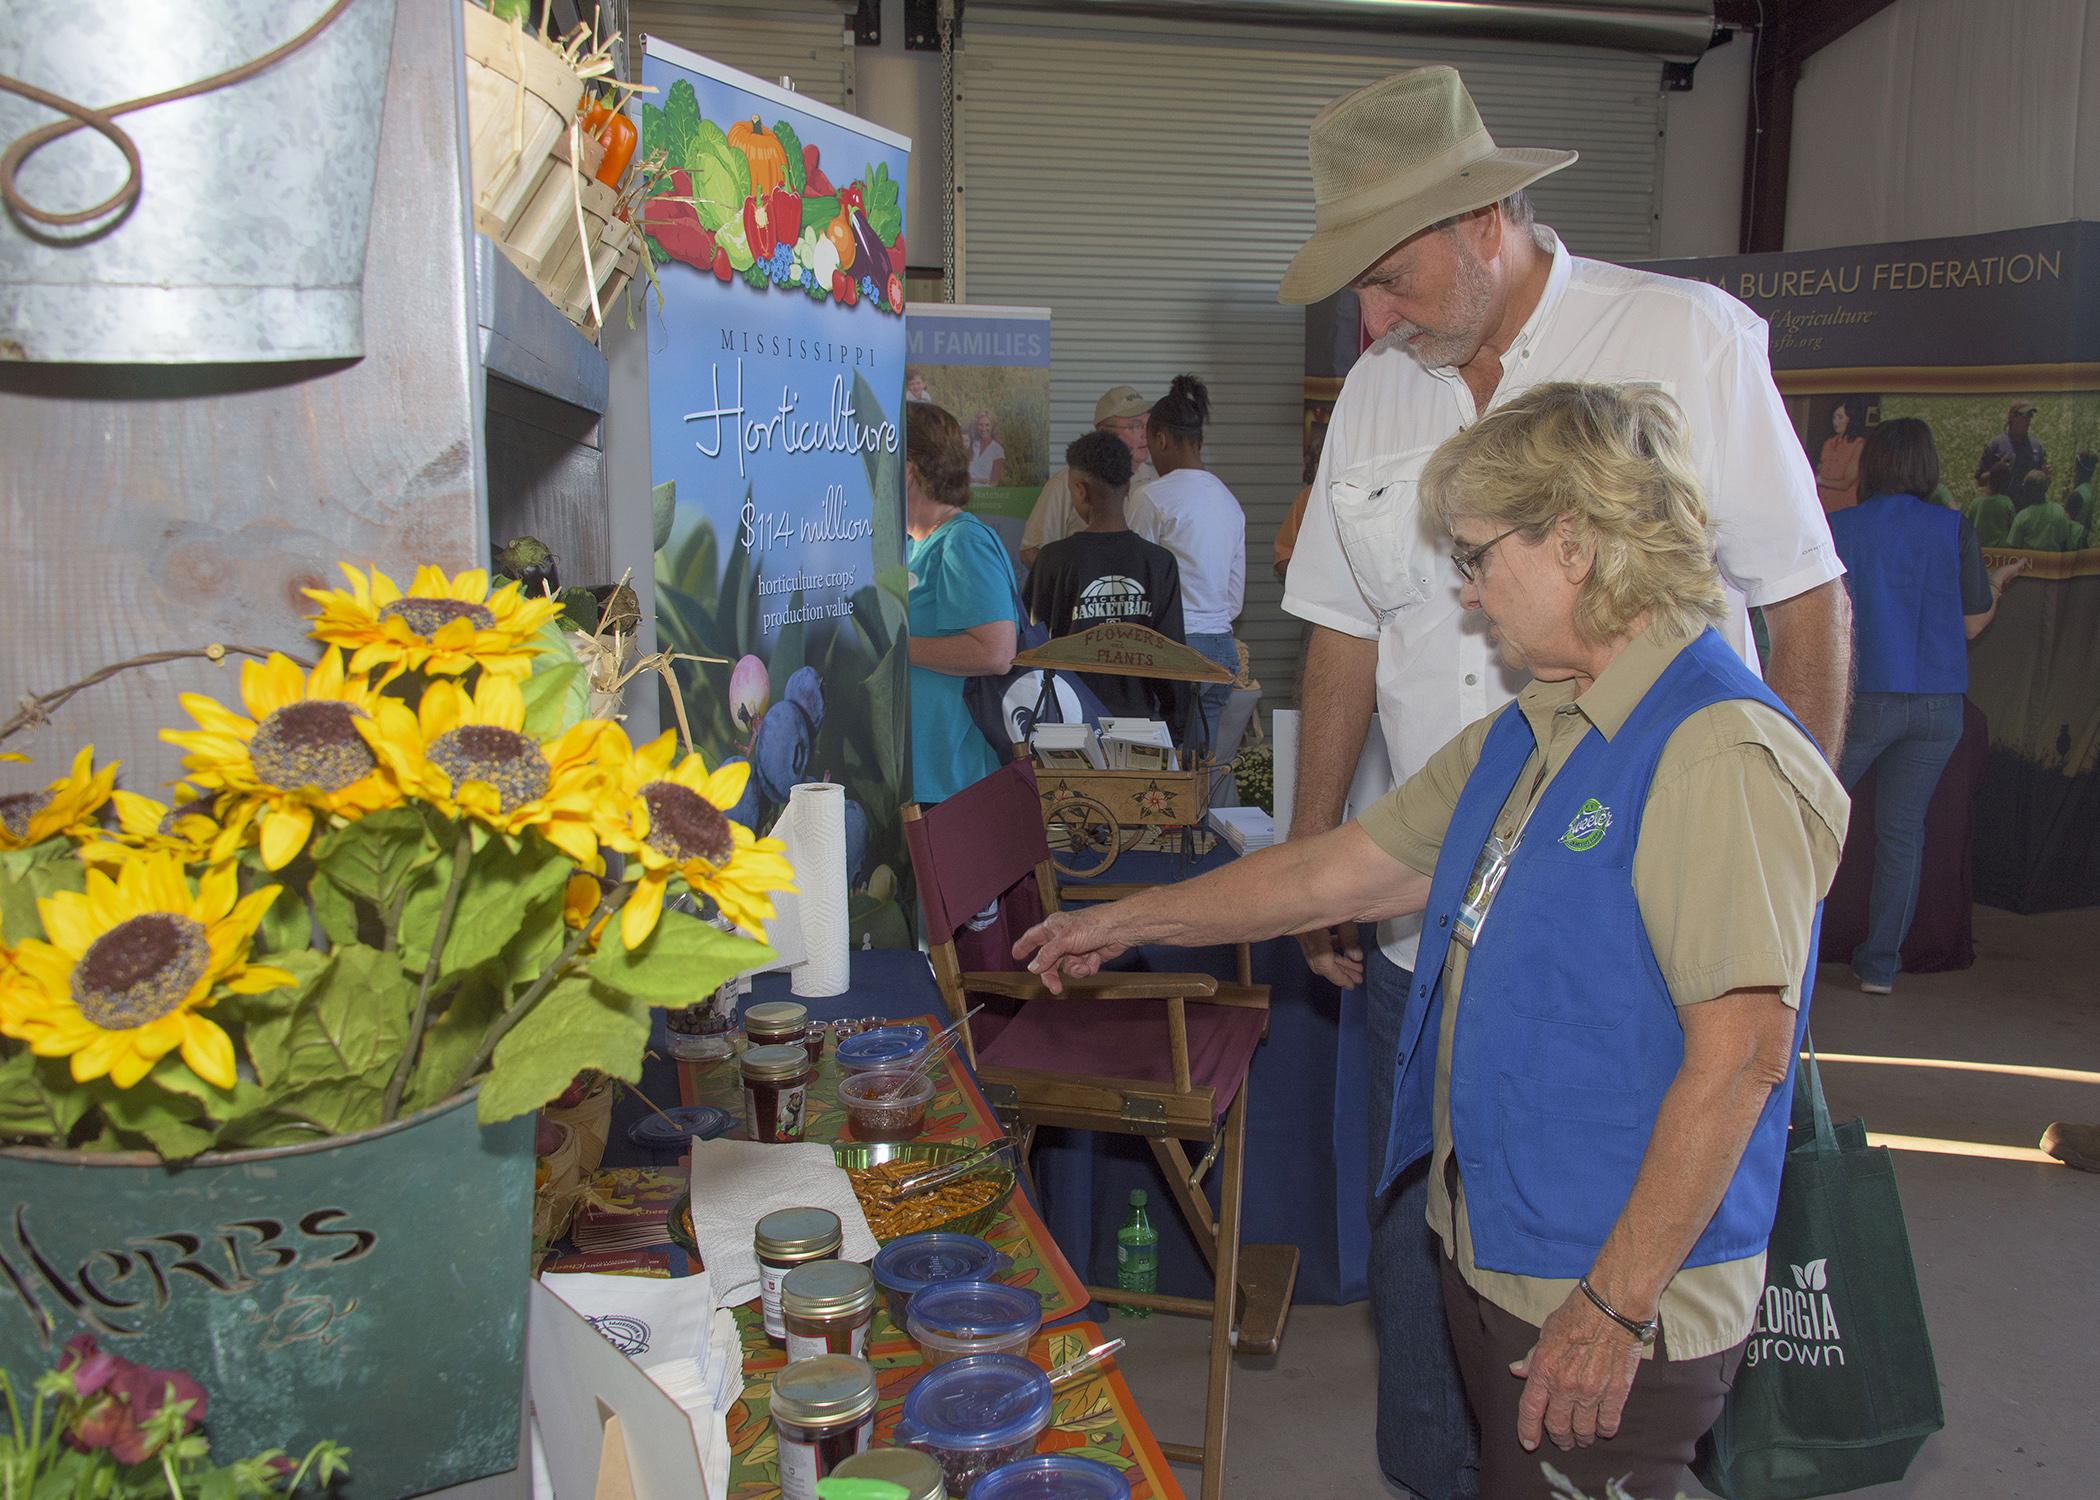 Lelia Kelly, a horticulture specialist with the Mississippi State University Extension Service, talks to a Sunbelt Ag Expo visitor about locally grown produce and Mississippi-made products on Oct. 22, 2015. (Photo by MSU Extension/Kevin Hudson)